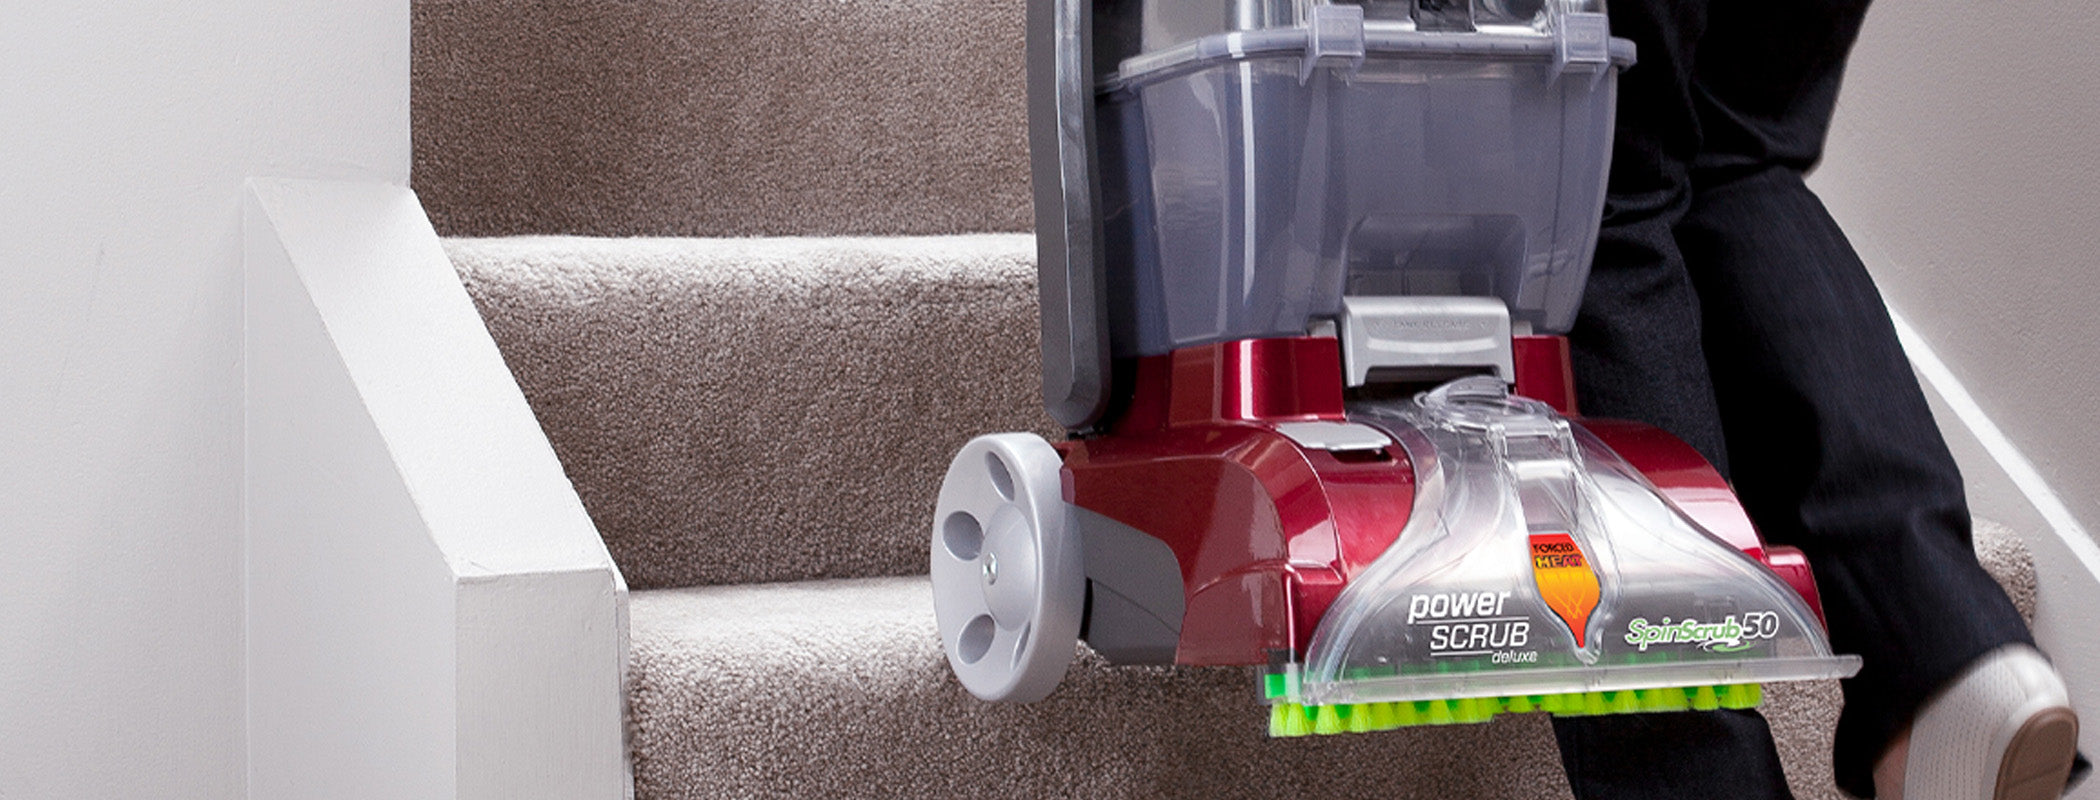 Hoover Power Scrub Deluxe Carpet Cleaner Machine with Storage Mat